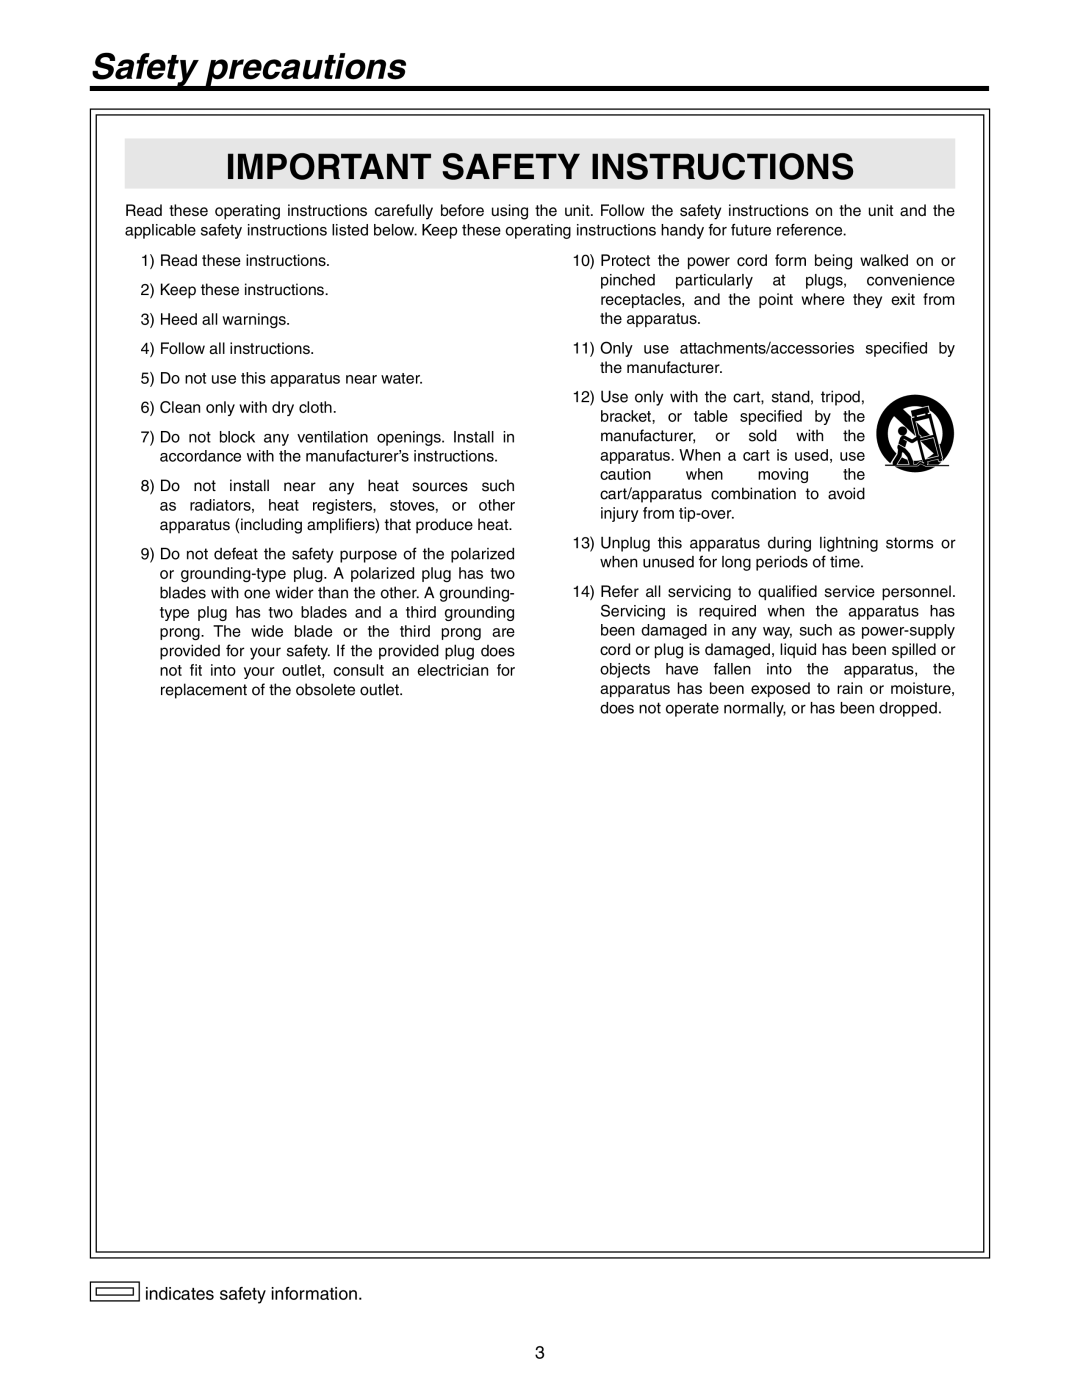 Panasonic AW-HS50N operating instructions Important Safety Instructions, Safety precautions, indicates safety information 